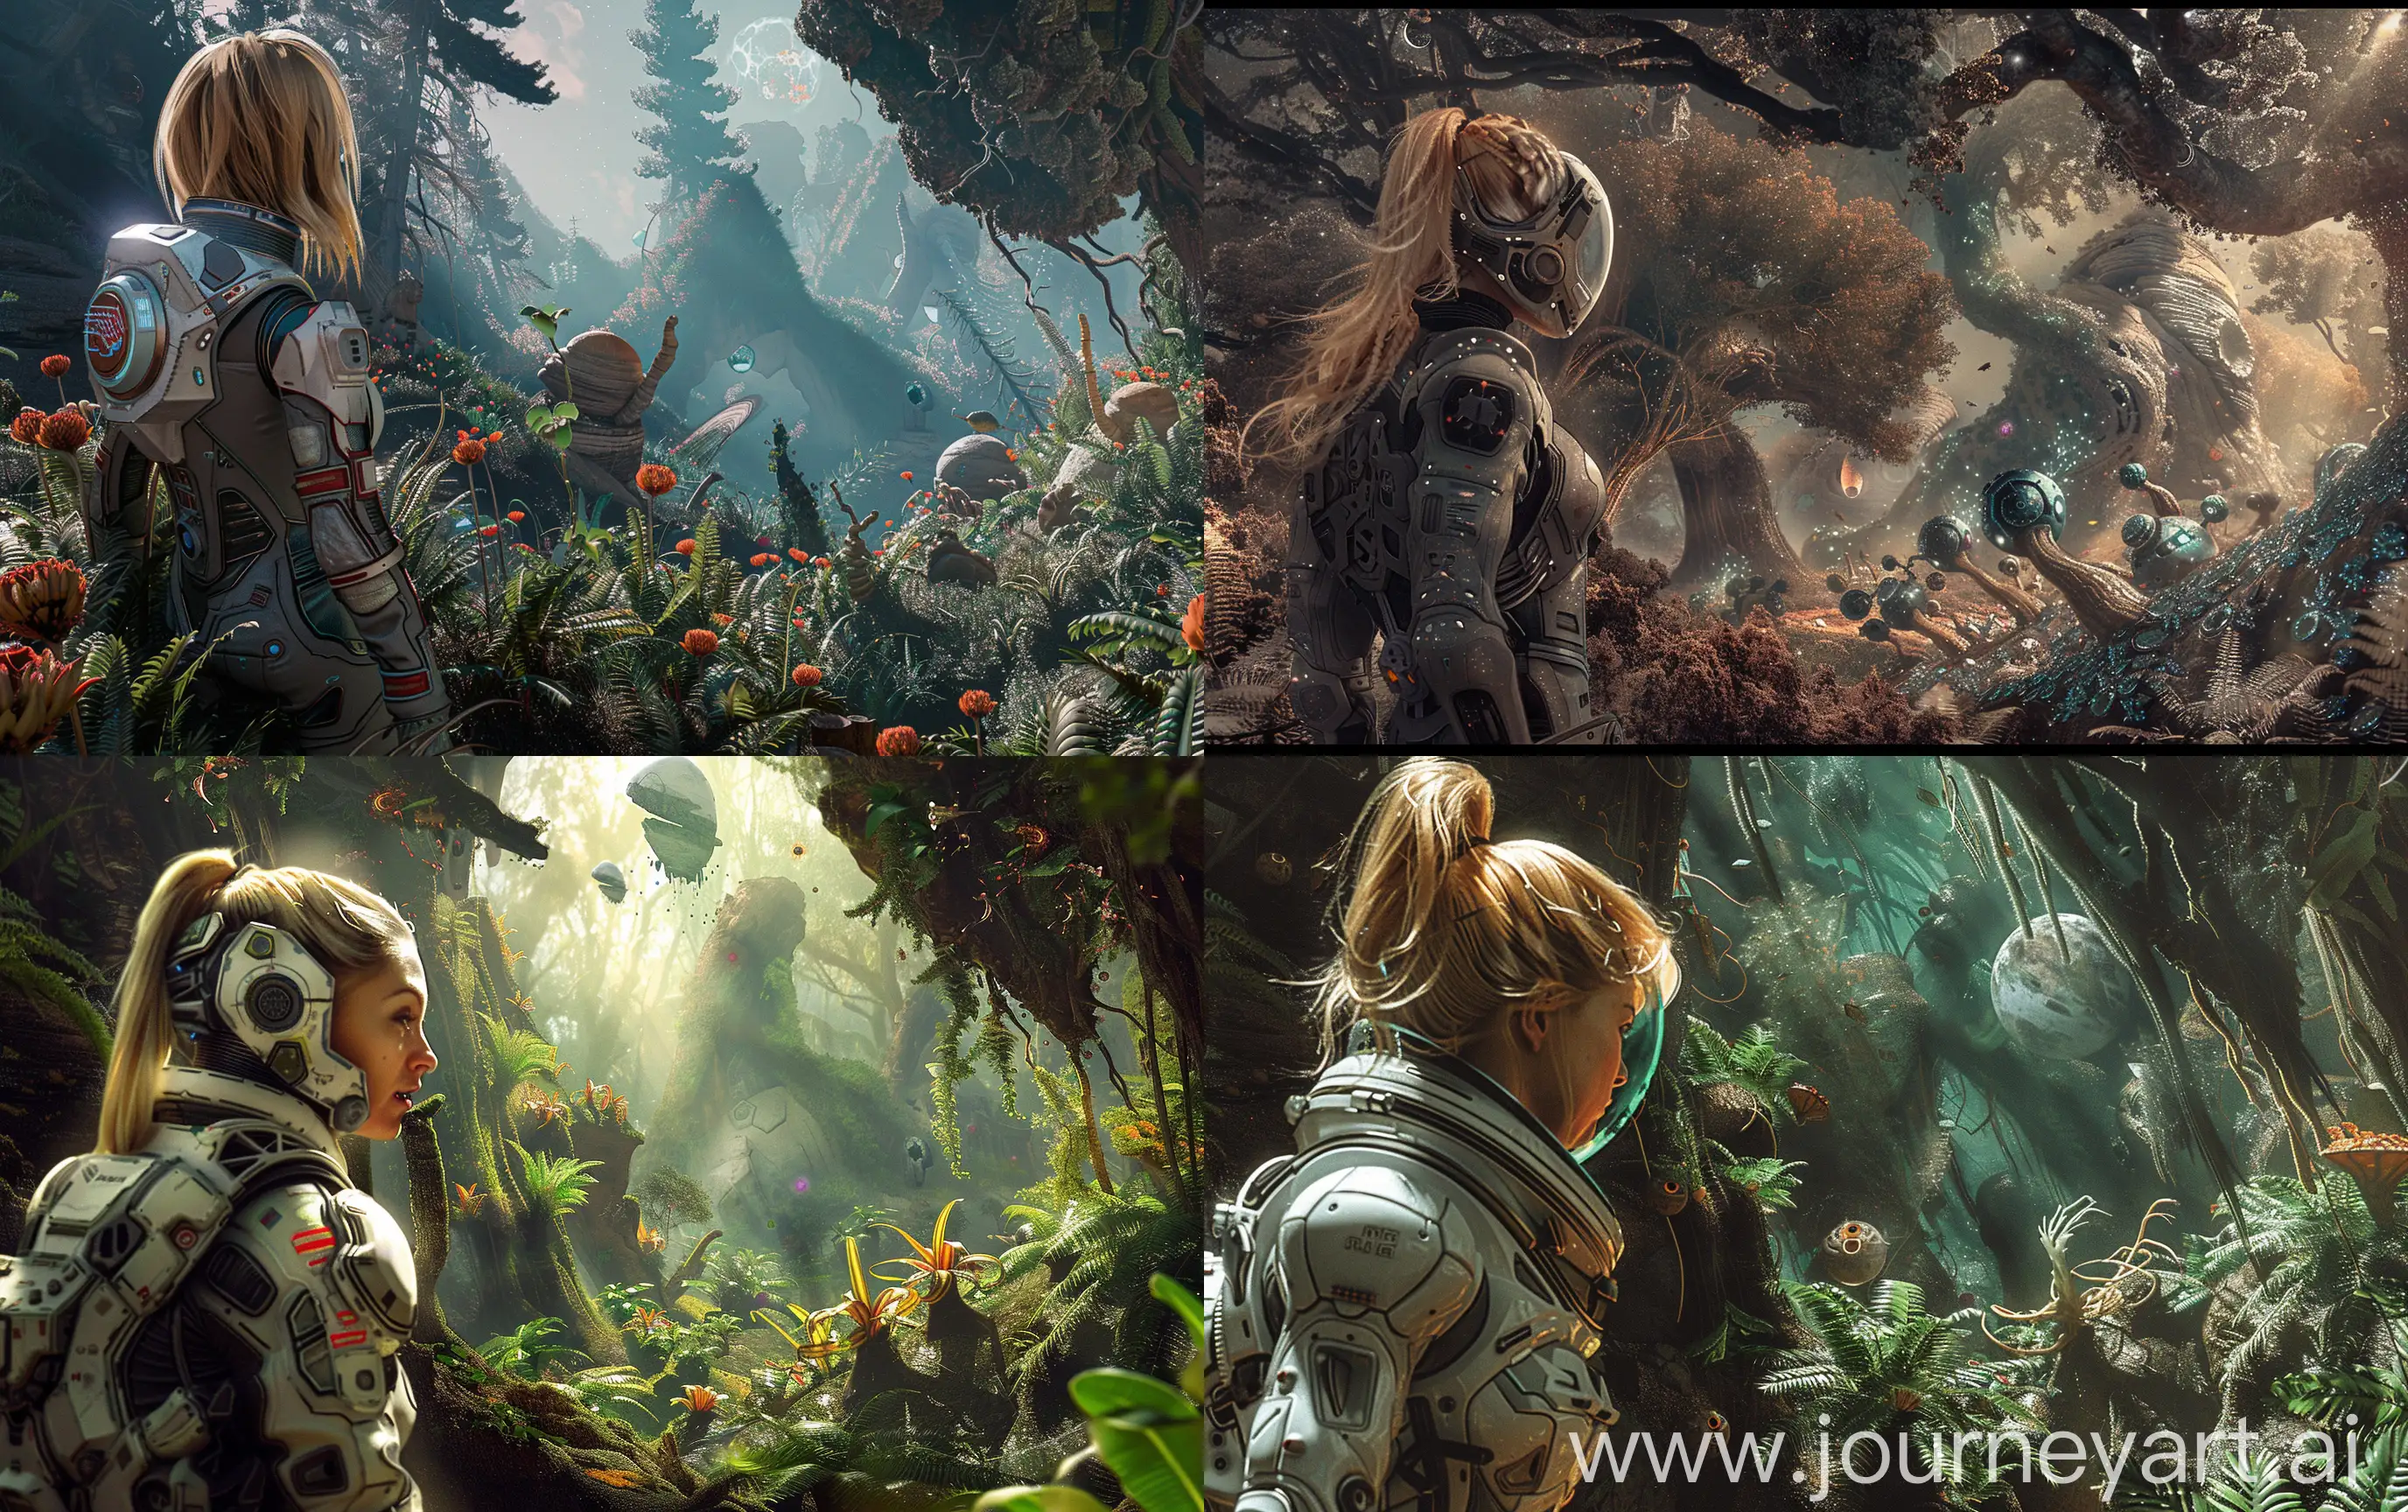 Exploring-a-Mystical-Planet-in-a-Futuristic-Forest-SciFi-Scene-with-FairHaired-Female-Astronaut